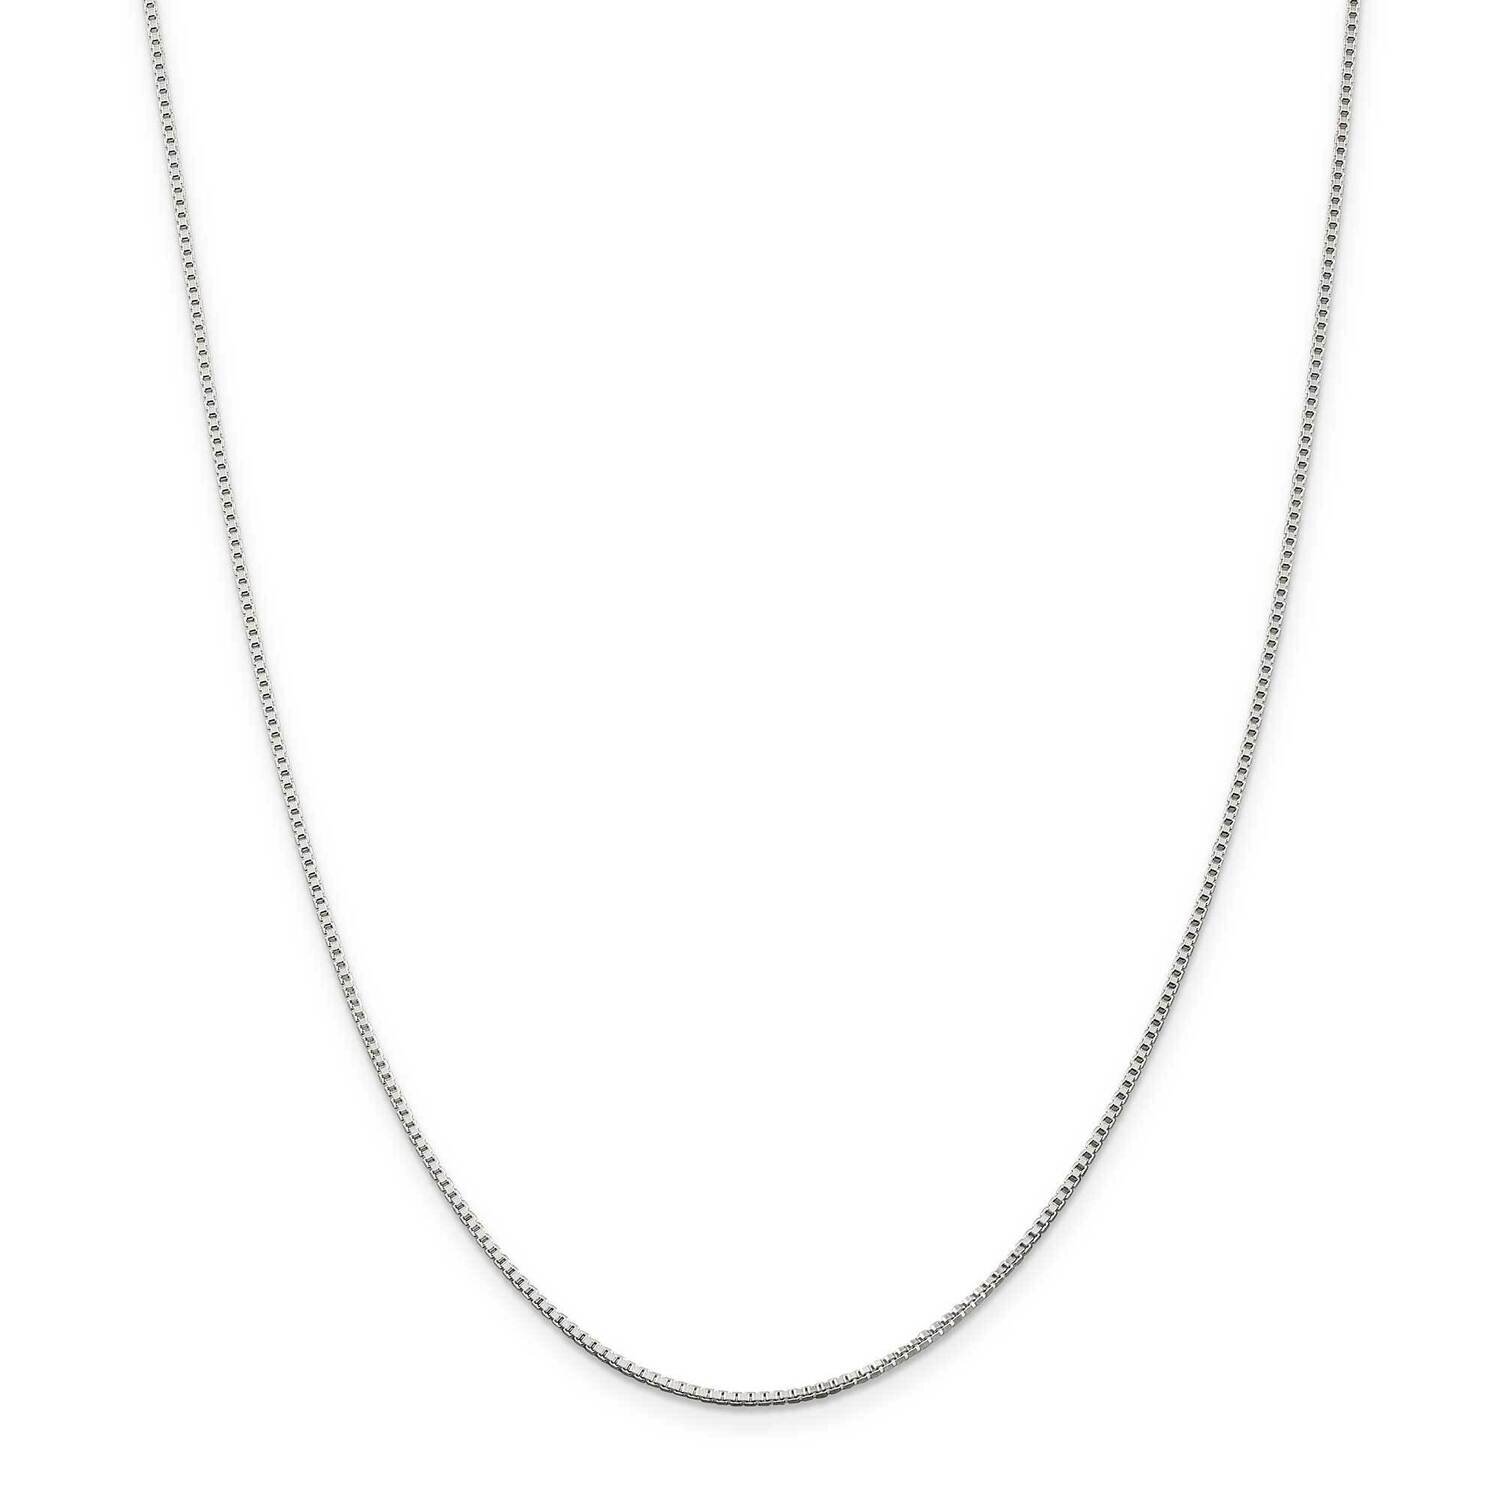 1.25mm Box Chain with 4 Inch Extender 22 Inch Sterling Silver Rhodium-Plated QBX024RH-22